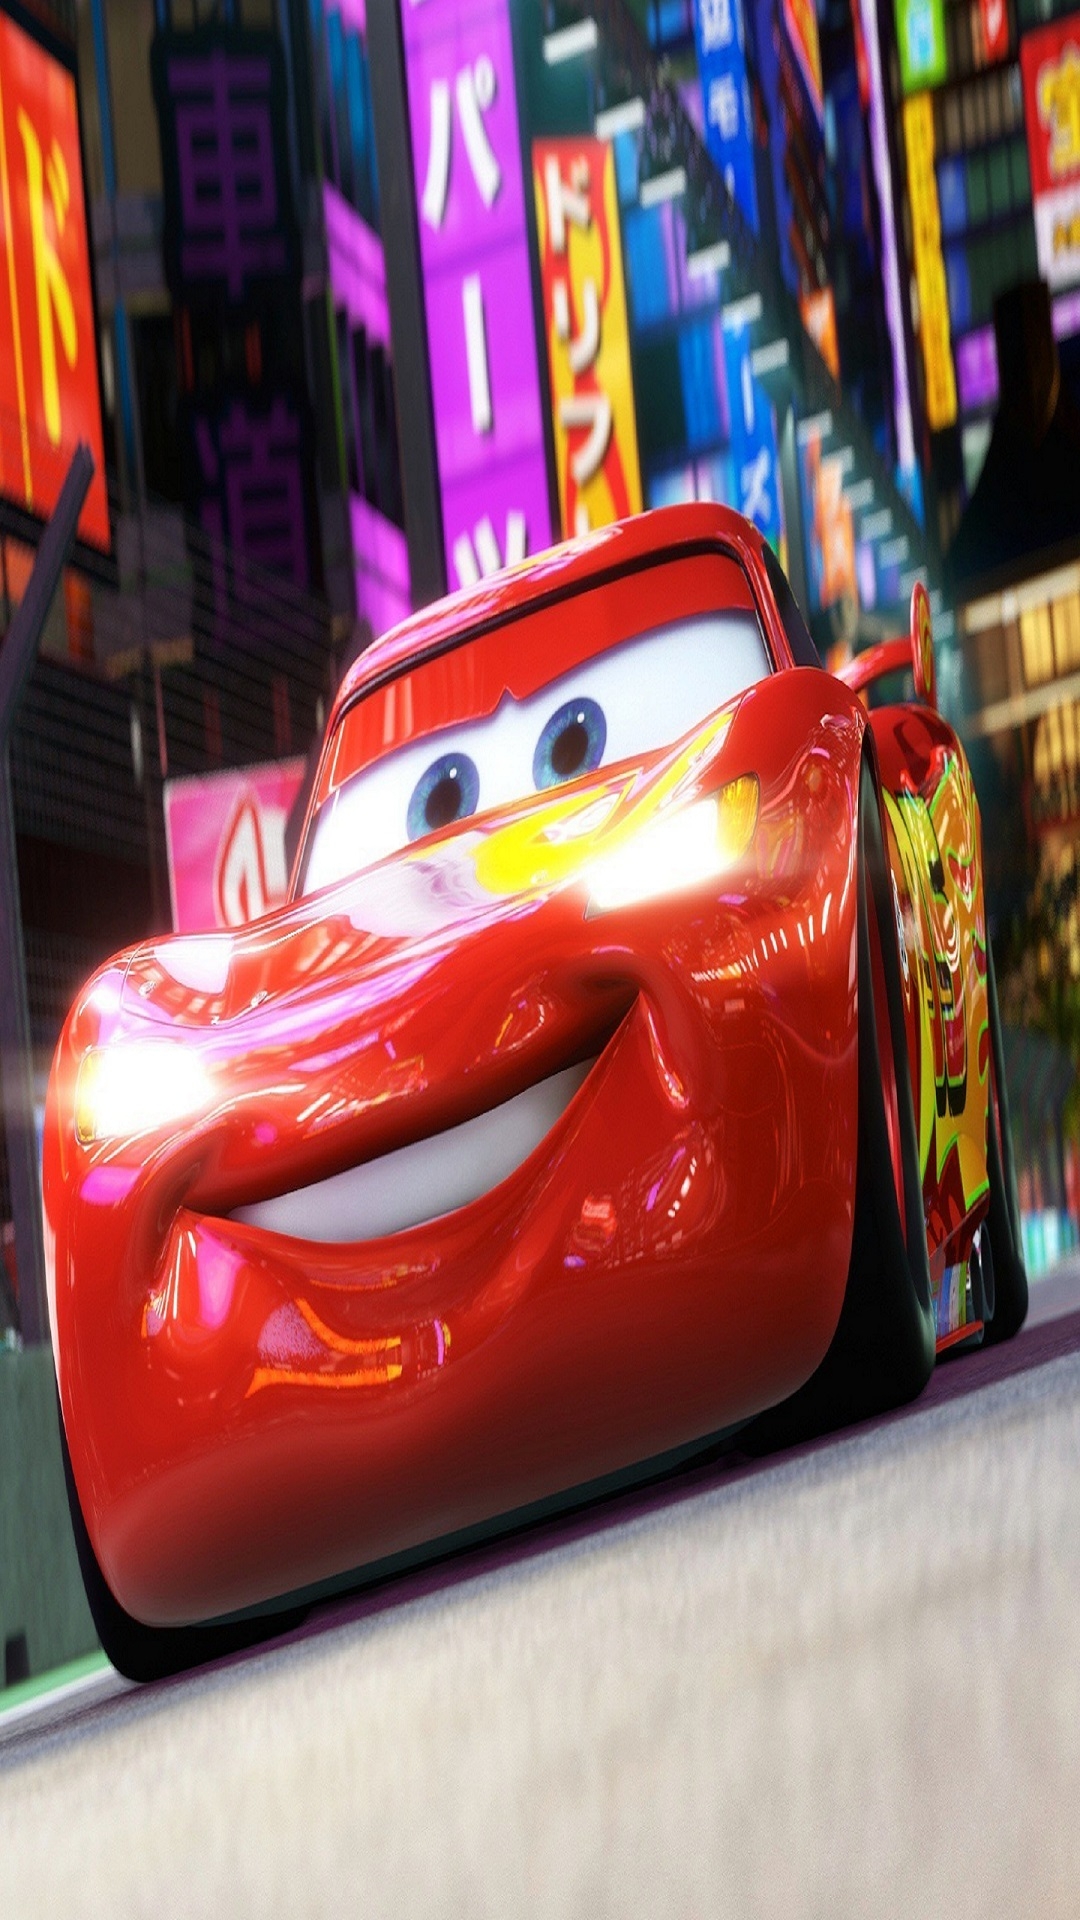 Cars 3 Movie for Apple iPhone 6S & 7 Plus resolution